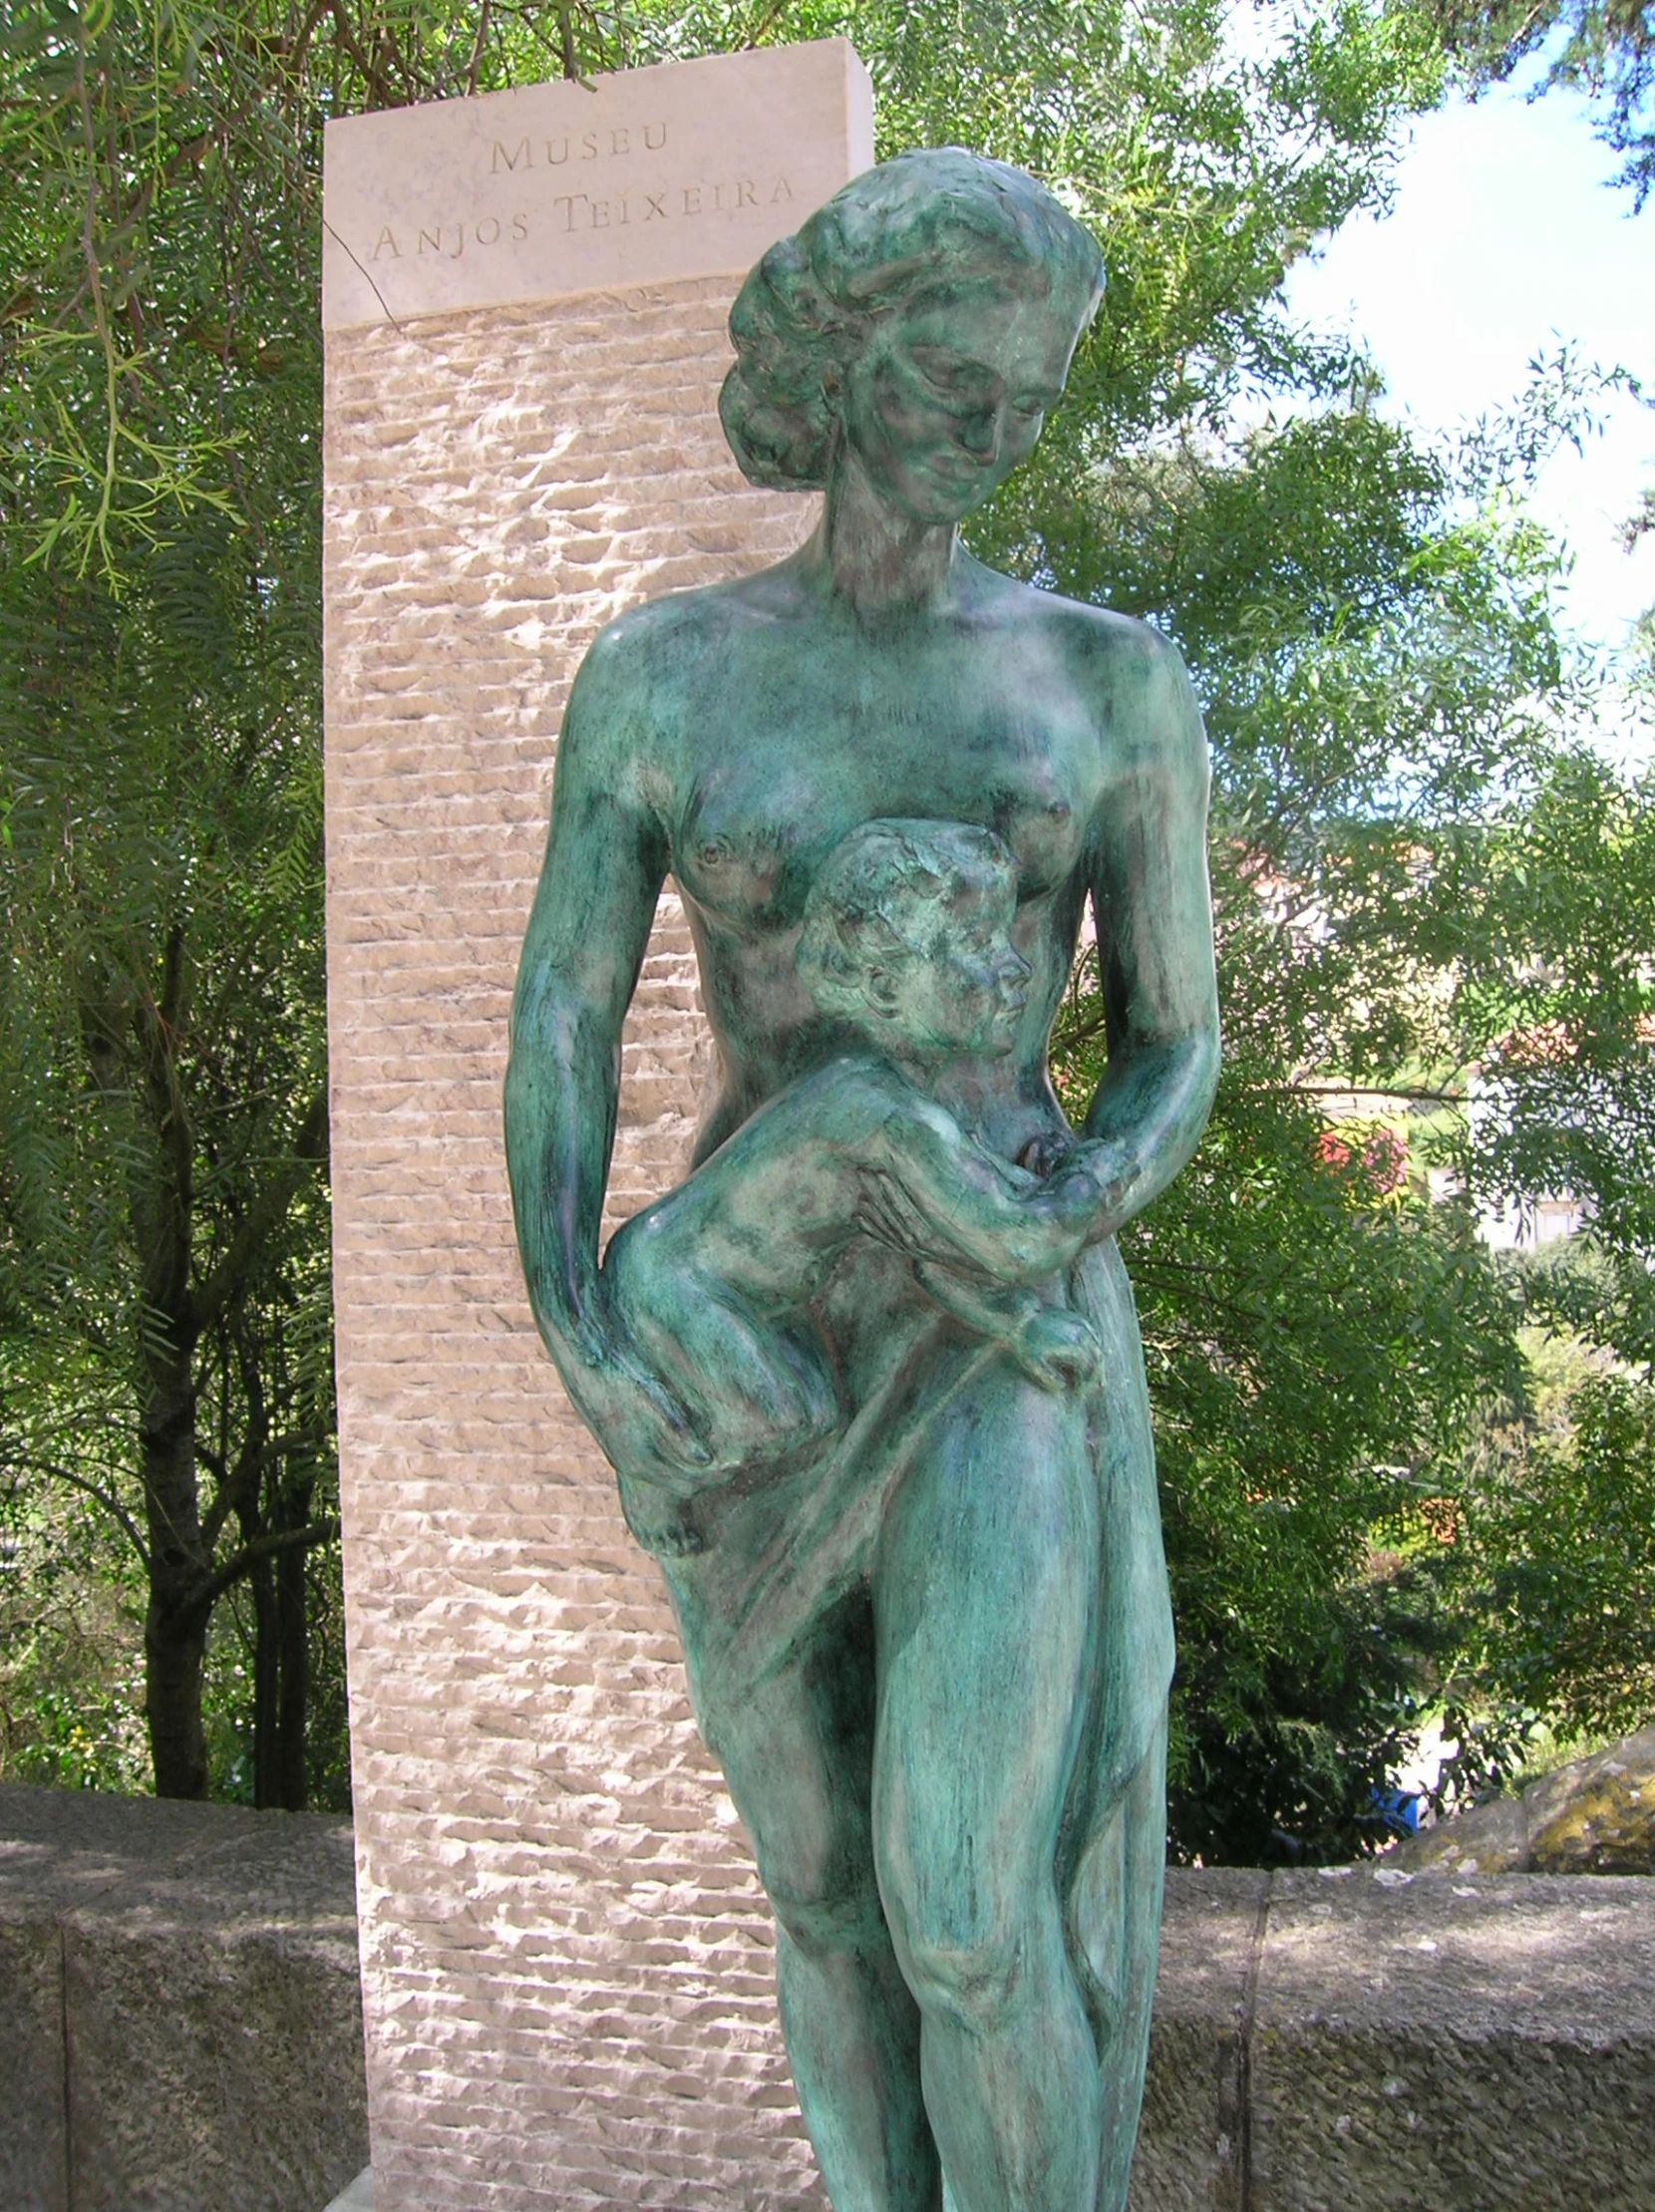 a statue is shown near the monument